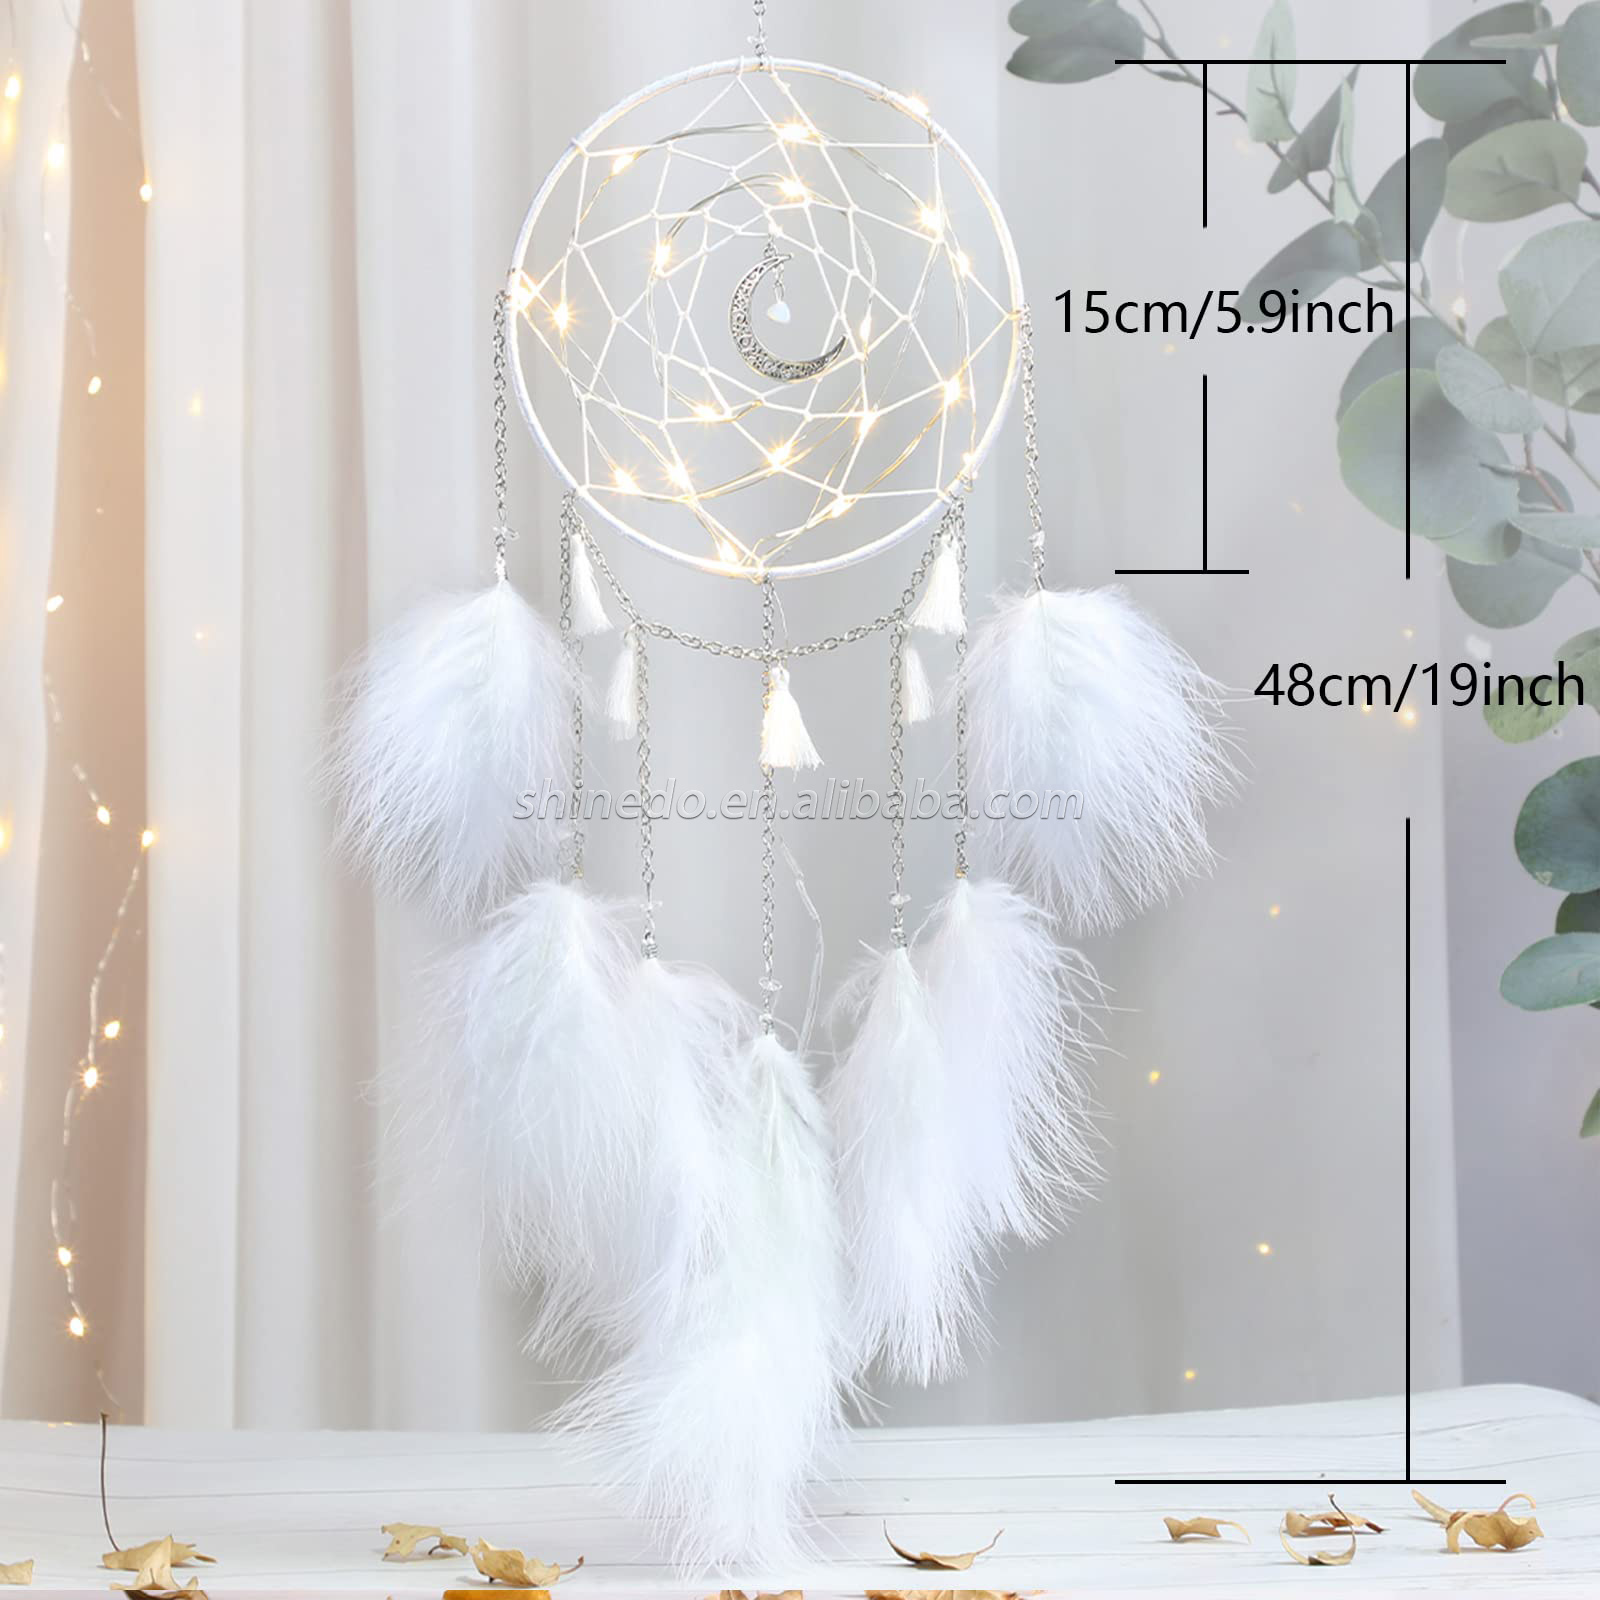 Handmade LED lights white feather dream catcher used for bedroom hanging wall interior decorations SD-SW199